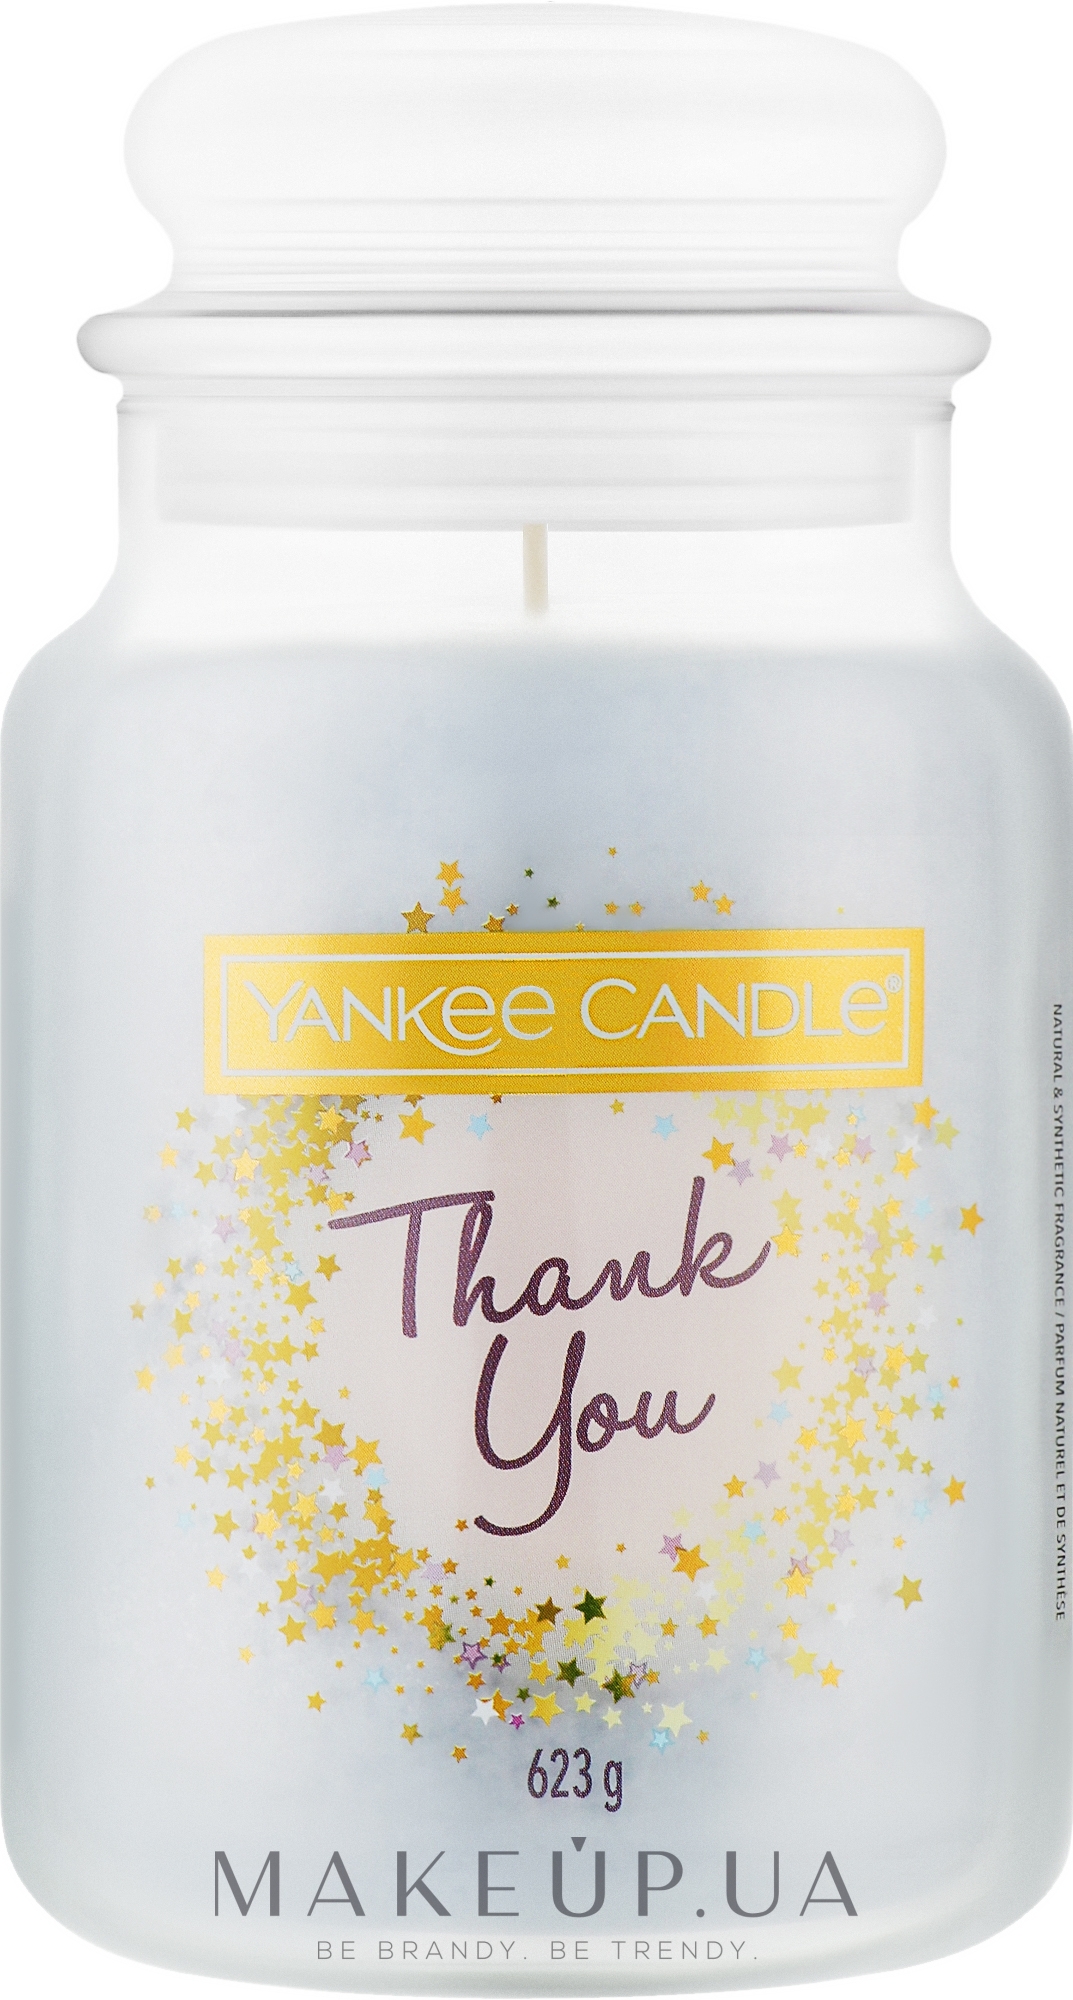 Ароматична свічка "Дякую вам" - Yankee Candle Thank You Scented Candle — фото 623g